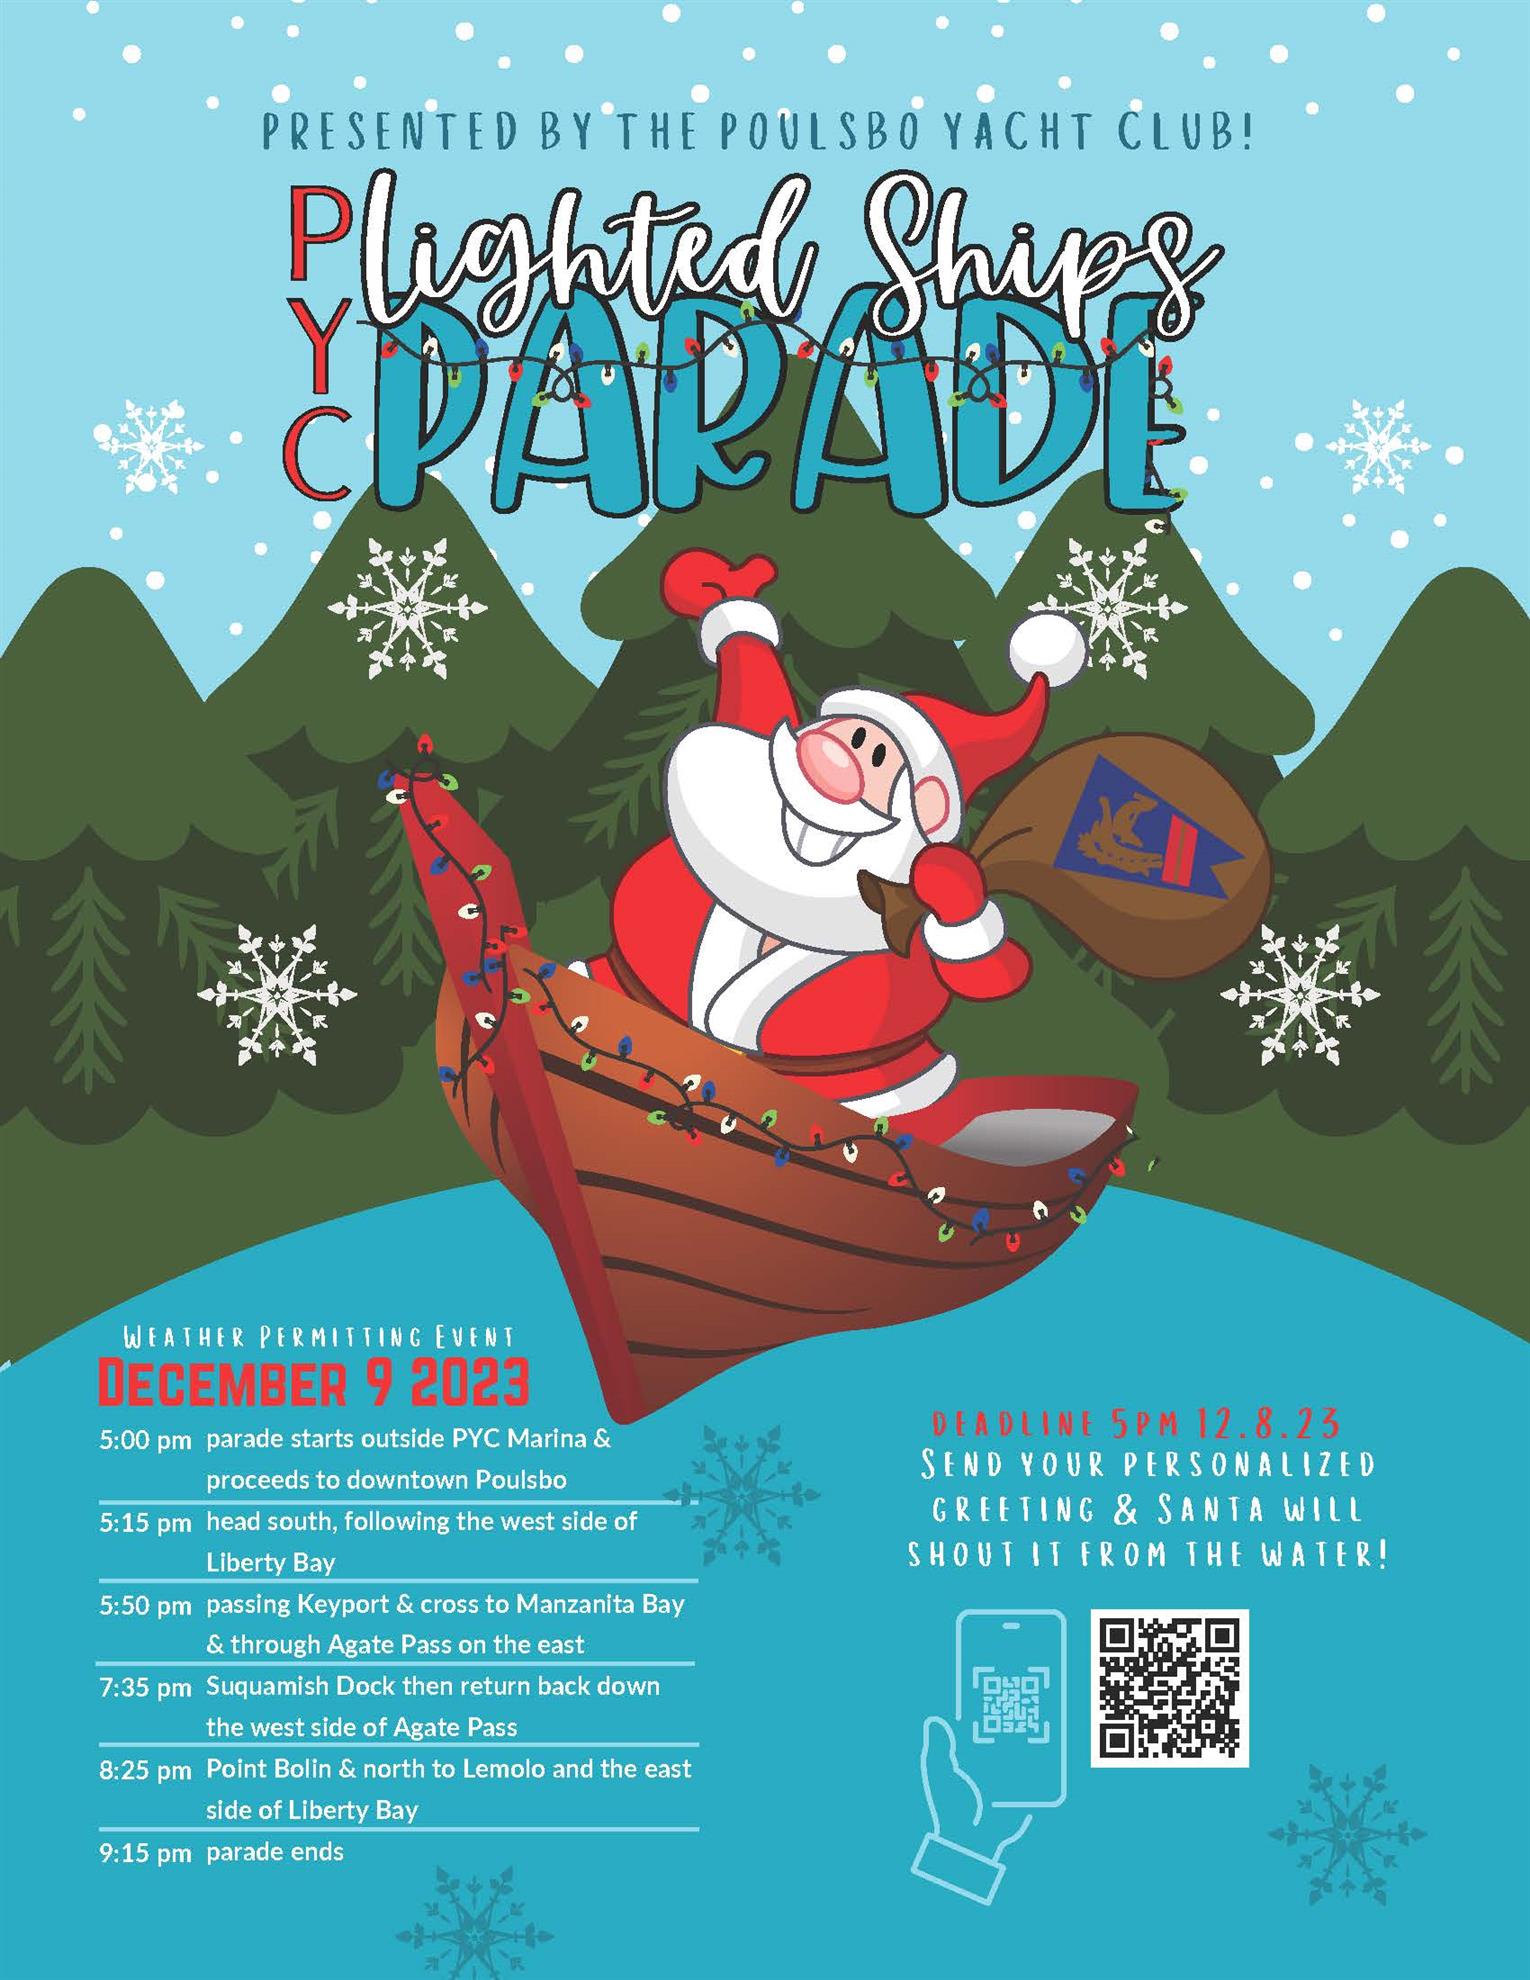 LIGHTED SHIPS PARADE | Dec 9 | Poulsbo Yacht Club